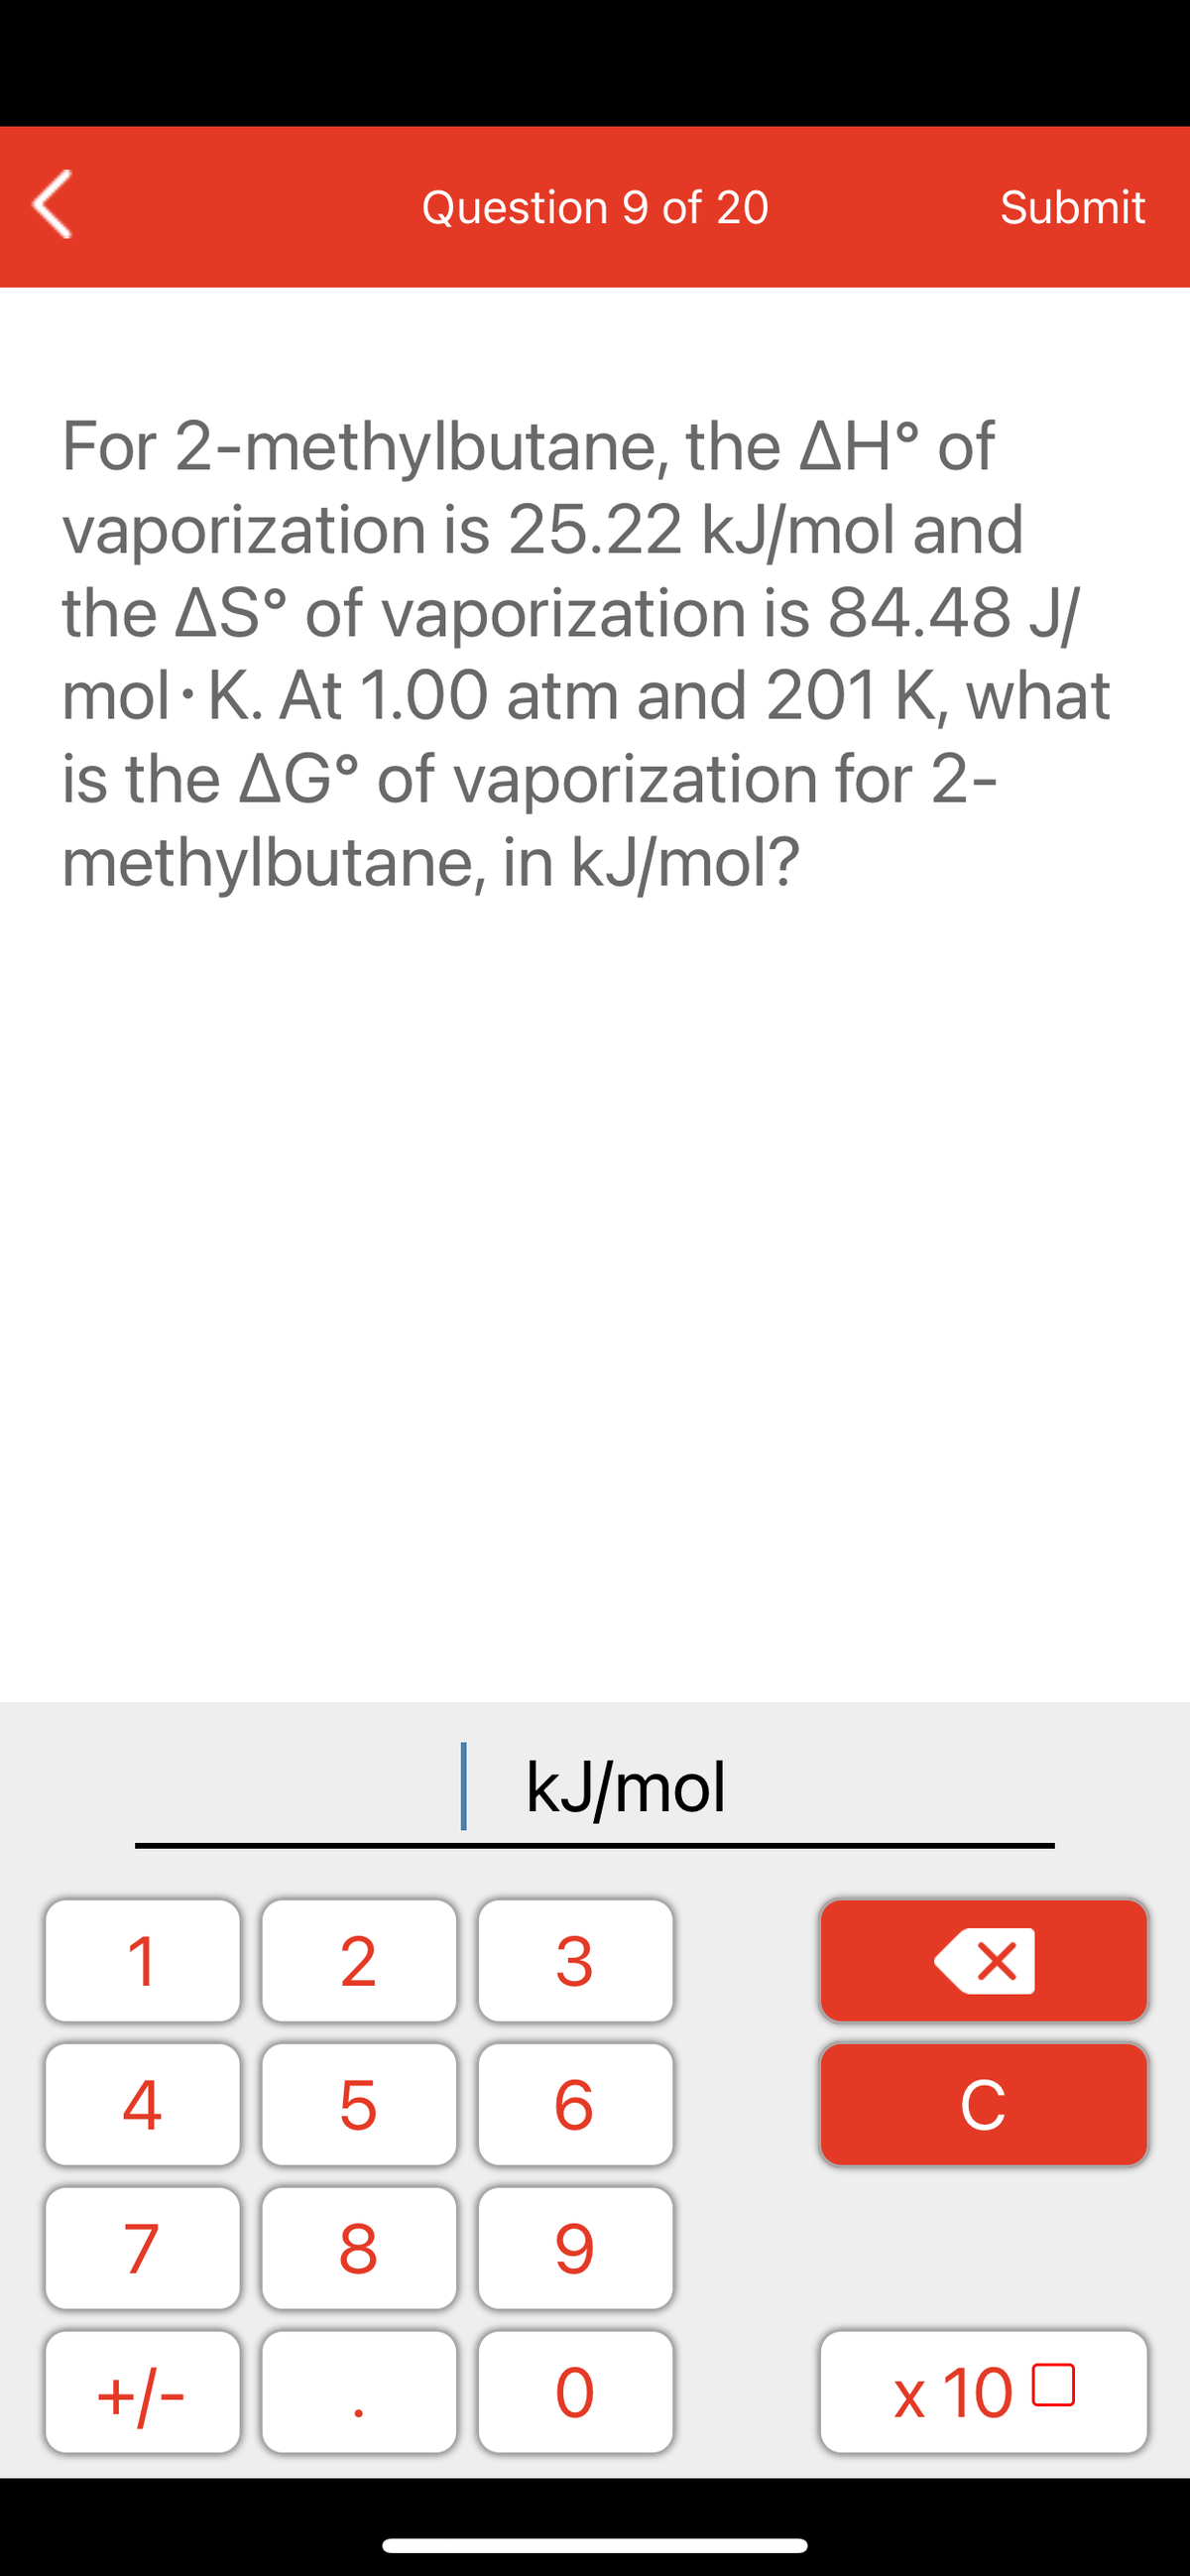 Question 9 of 20
Submit
For 2-methylbutane, the AH° of
vaporization is 25.22 kJ/mol and
the AS° of vaporization is 84.48 J/
mol· K. At 1.00 atm and 201 K, what
is the AG° of vaporization for 2-
methylbutane, in kJ/mol?
kJ/mol
1
2
3
C
7
9.
+/-
x 10 0
LO
00
